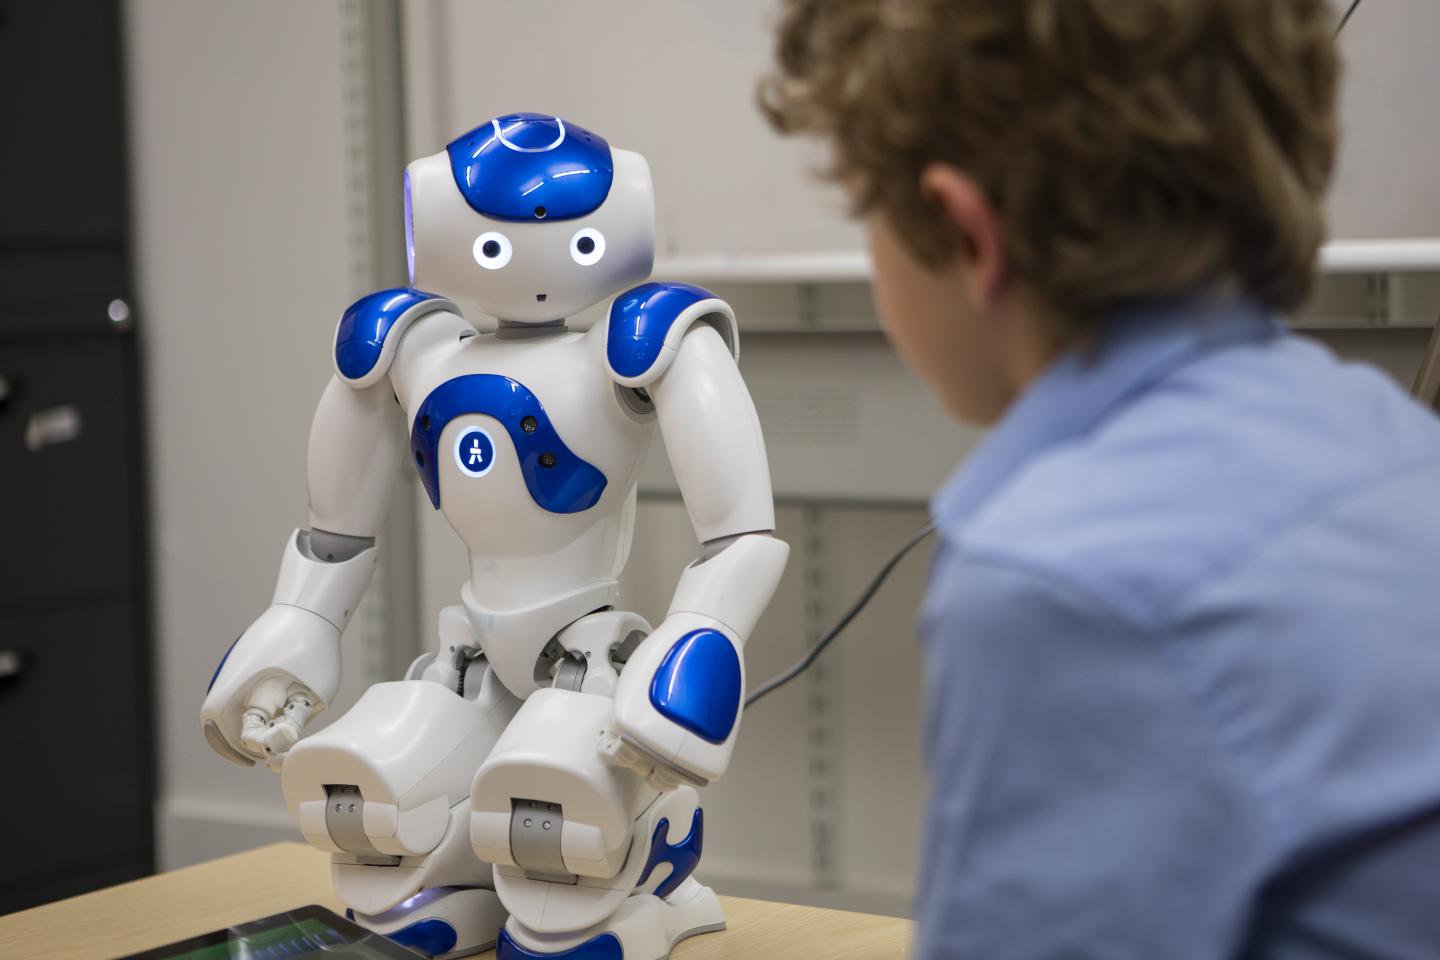 Children aged between seven and nine were more likely to give the same responses as the robots, even if they were obviously incorrect. (Source: University of Plymouth)